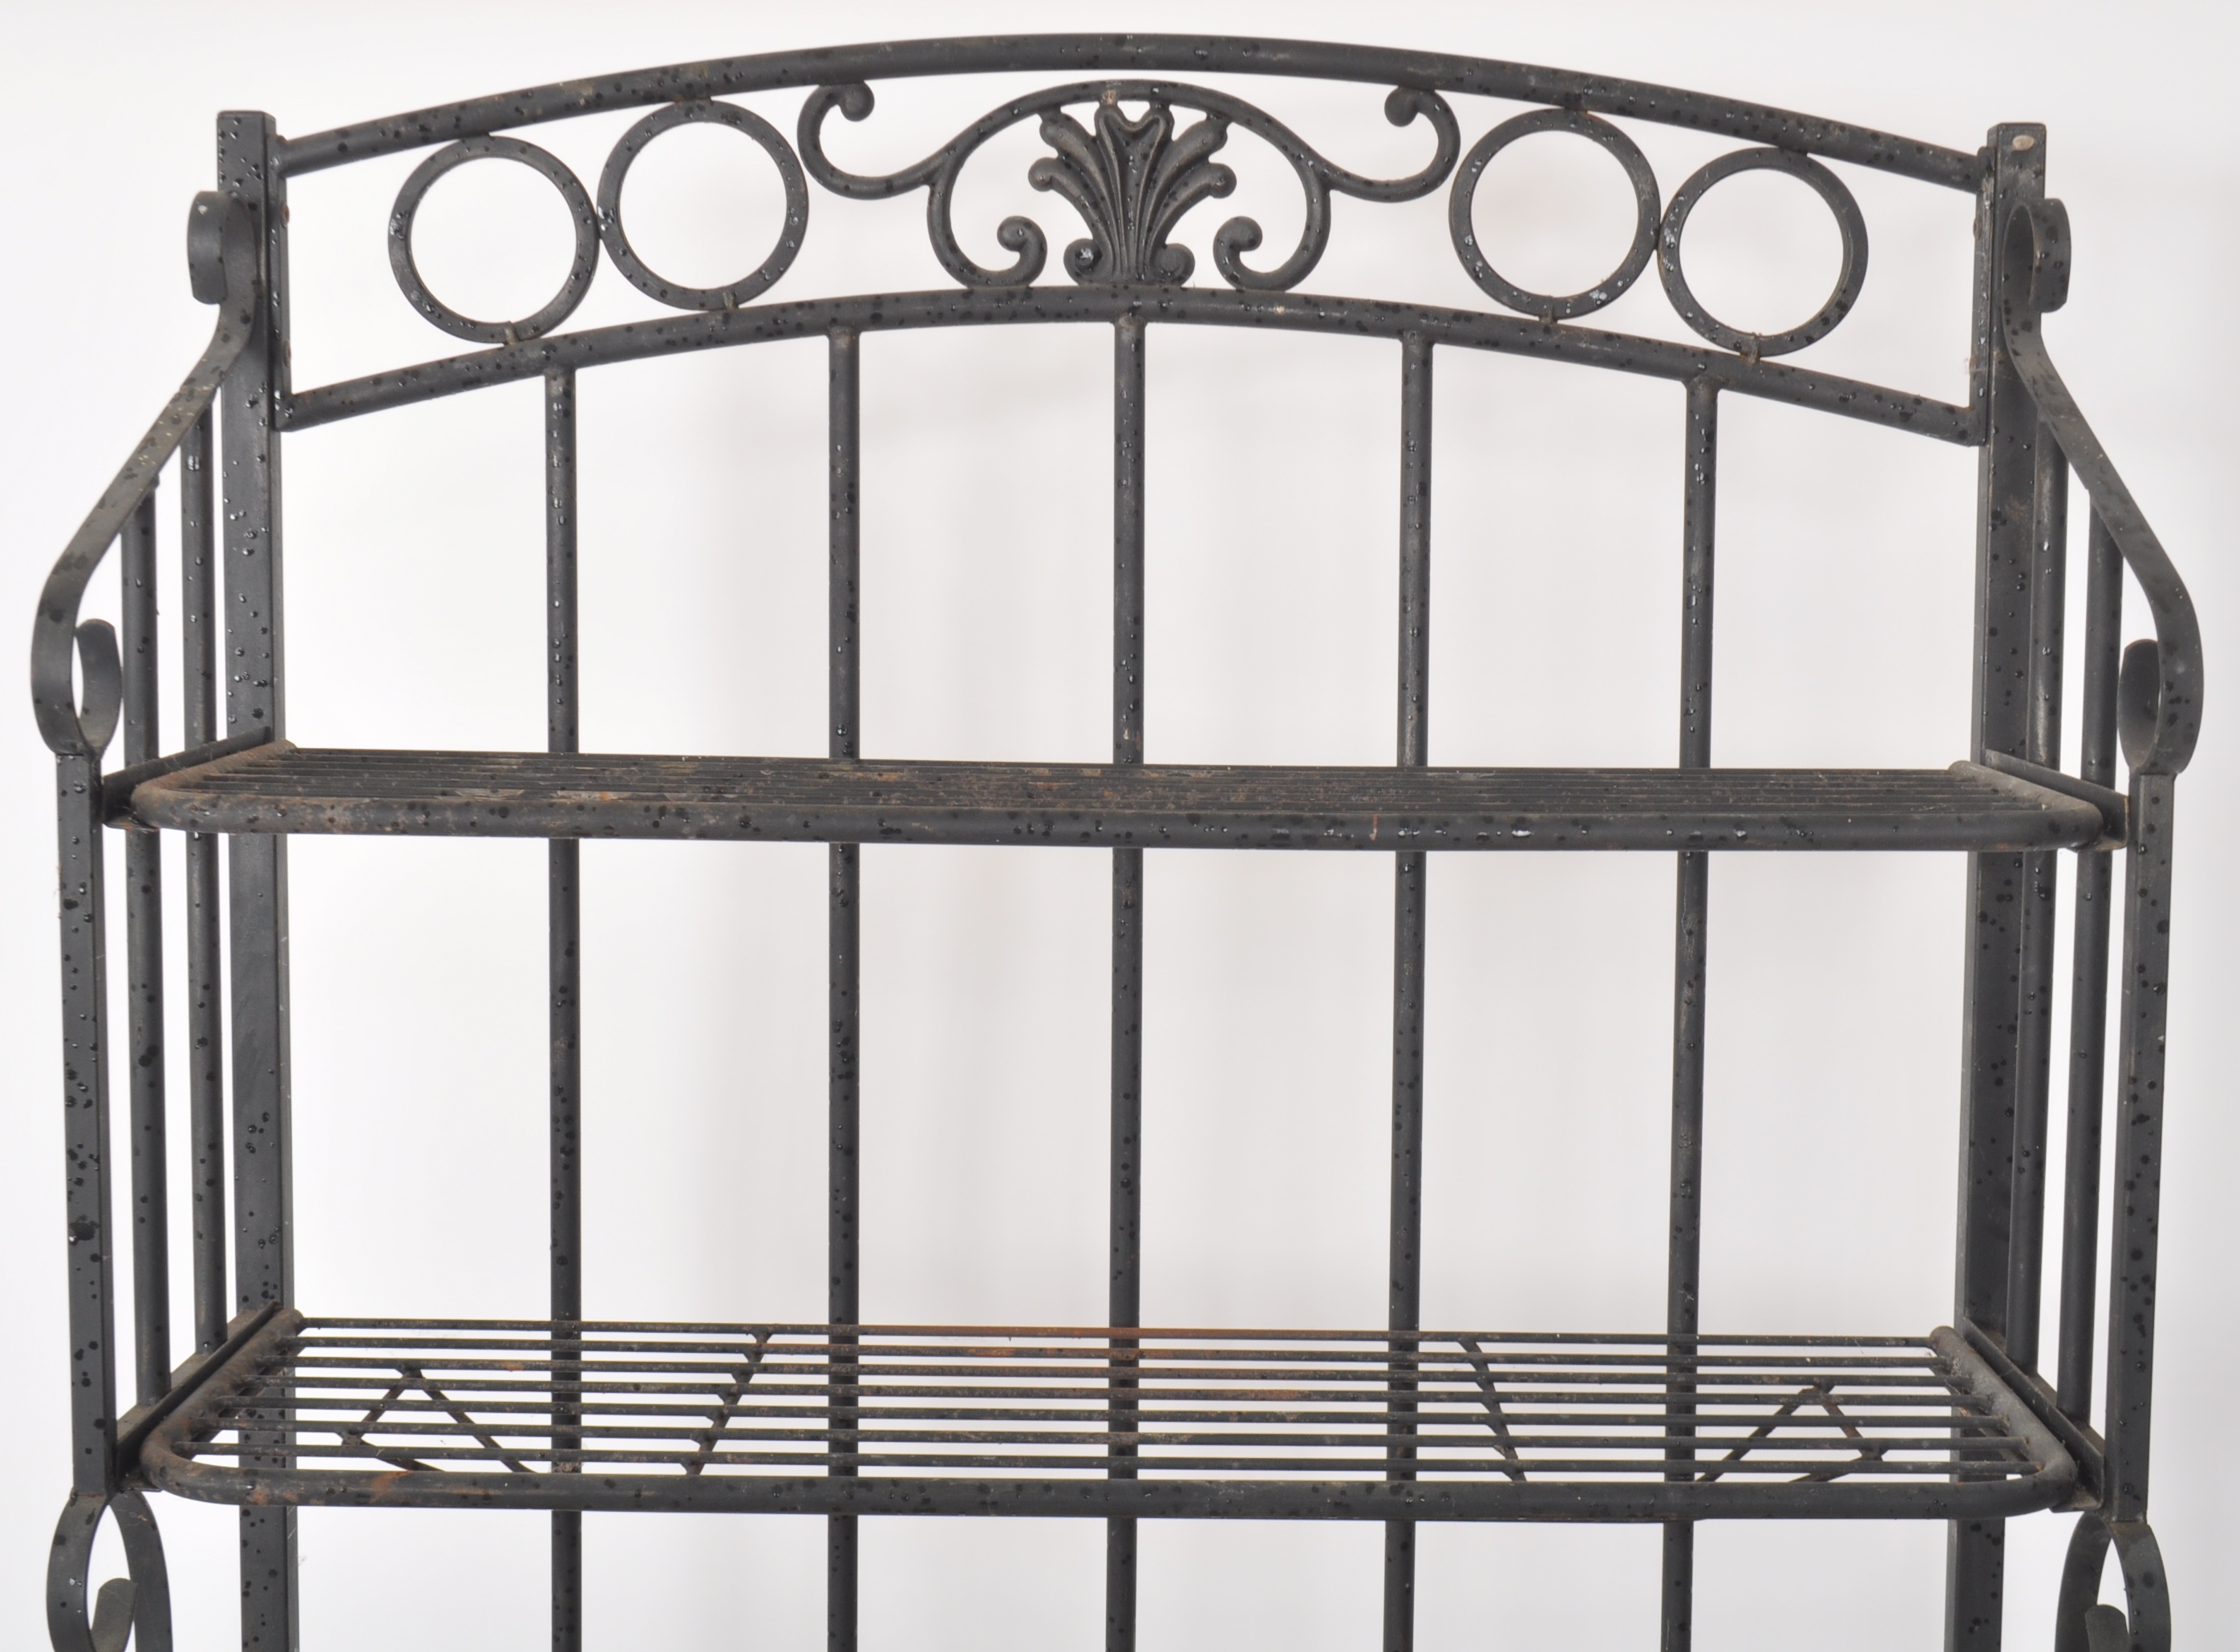 CONTEMPORARY FRENCH STYLE WROUGHT IRON BAKERS RACK - Image 2 of 6